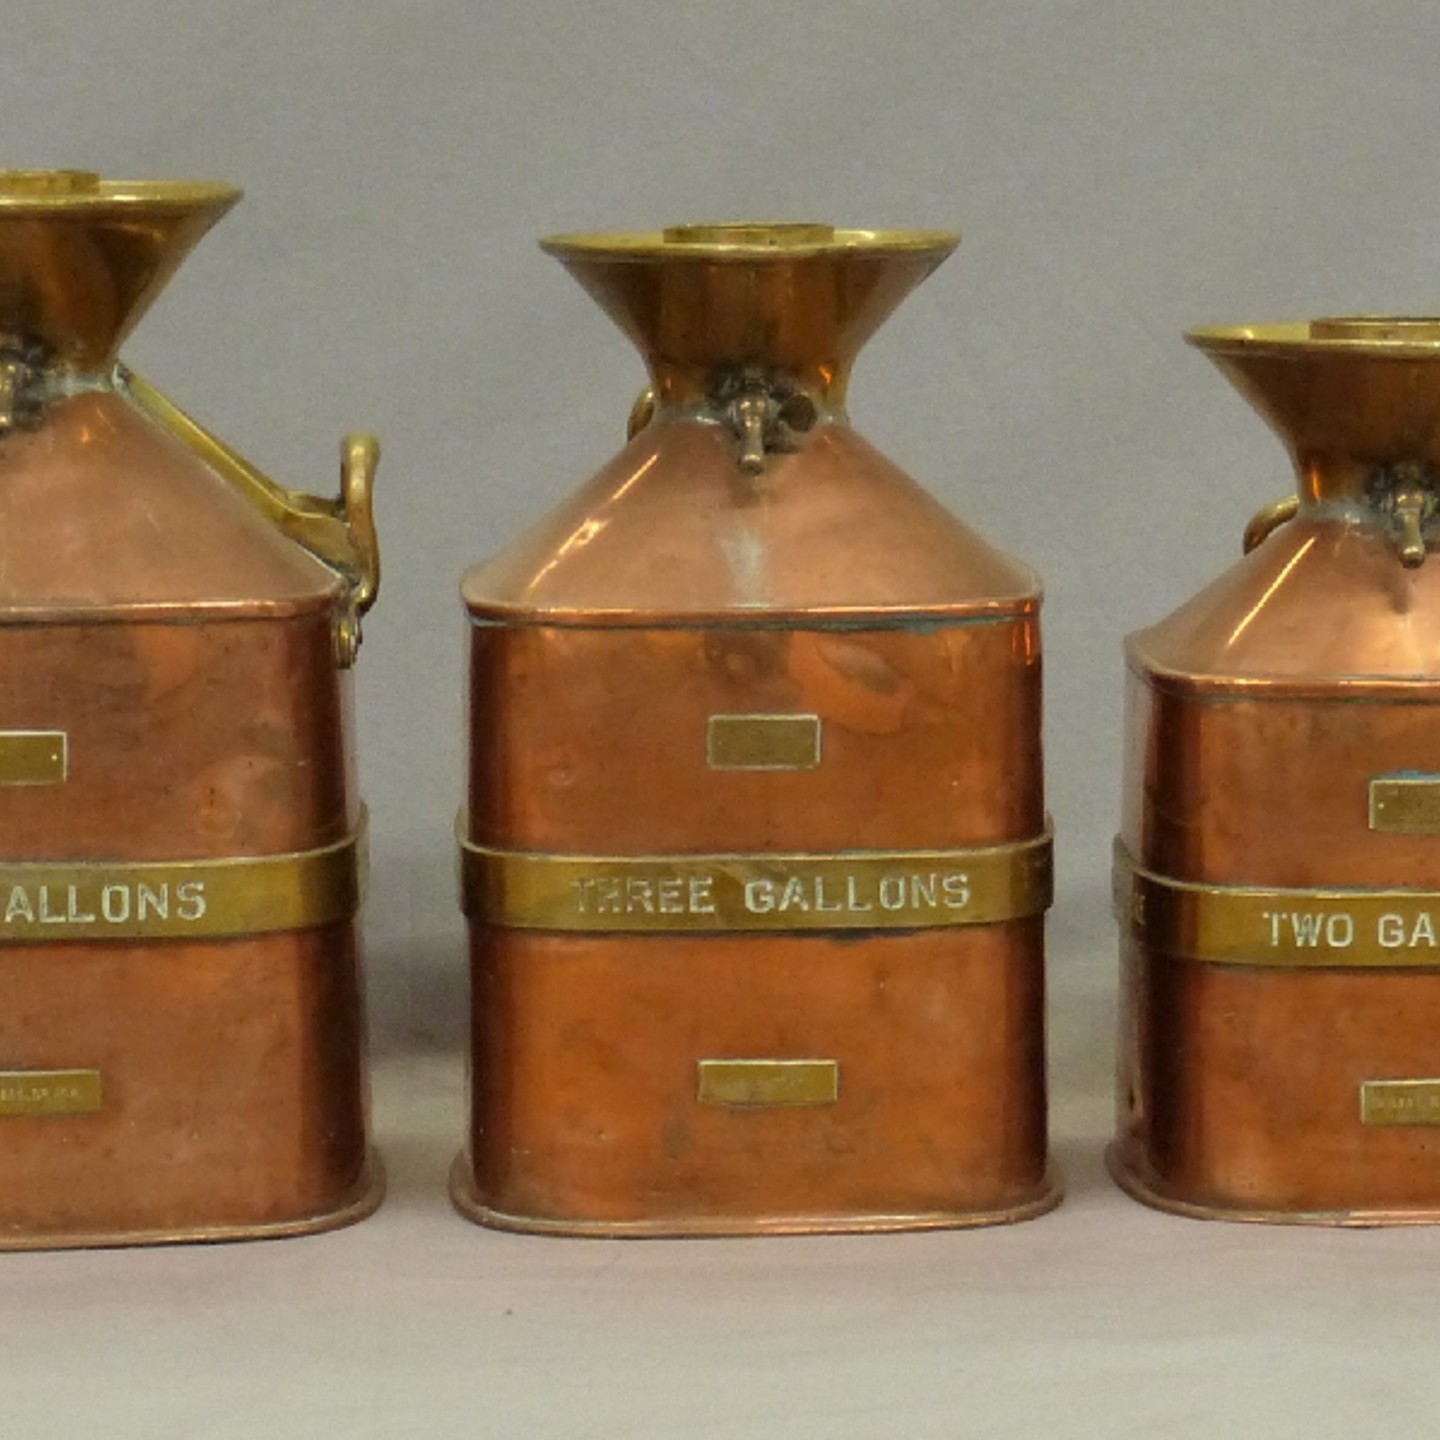 Set Of Six Monmouthshire County Council Chekpump Petrol Measures By Gaskell & Chambers Ltd Sold £2,000